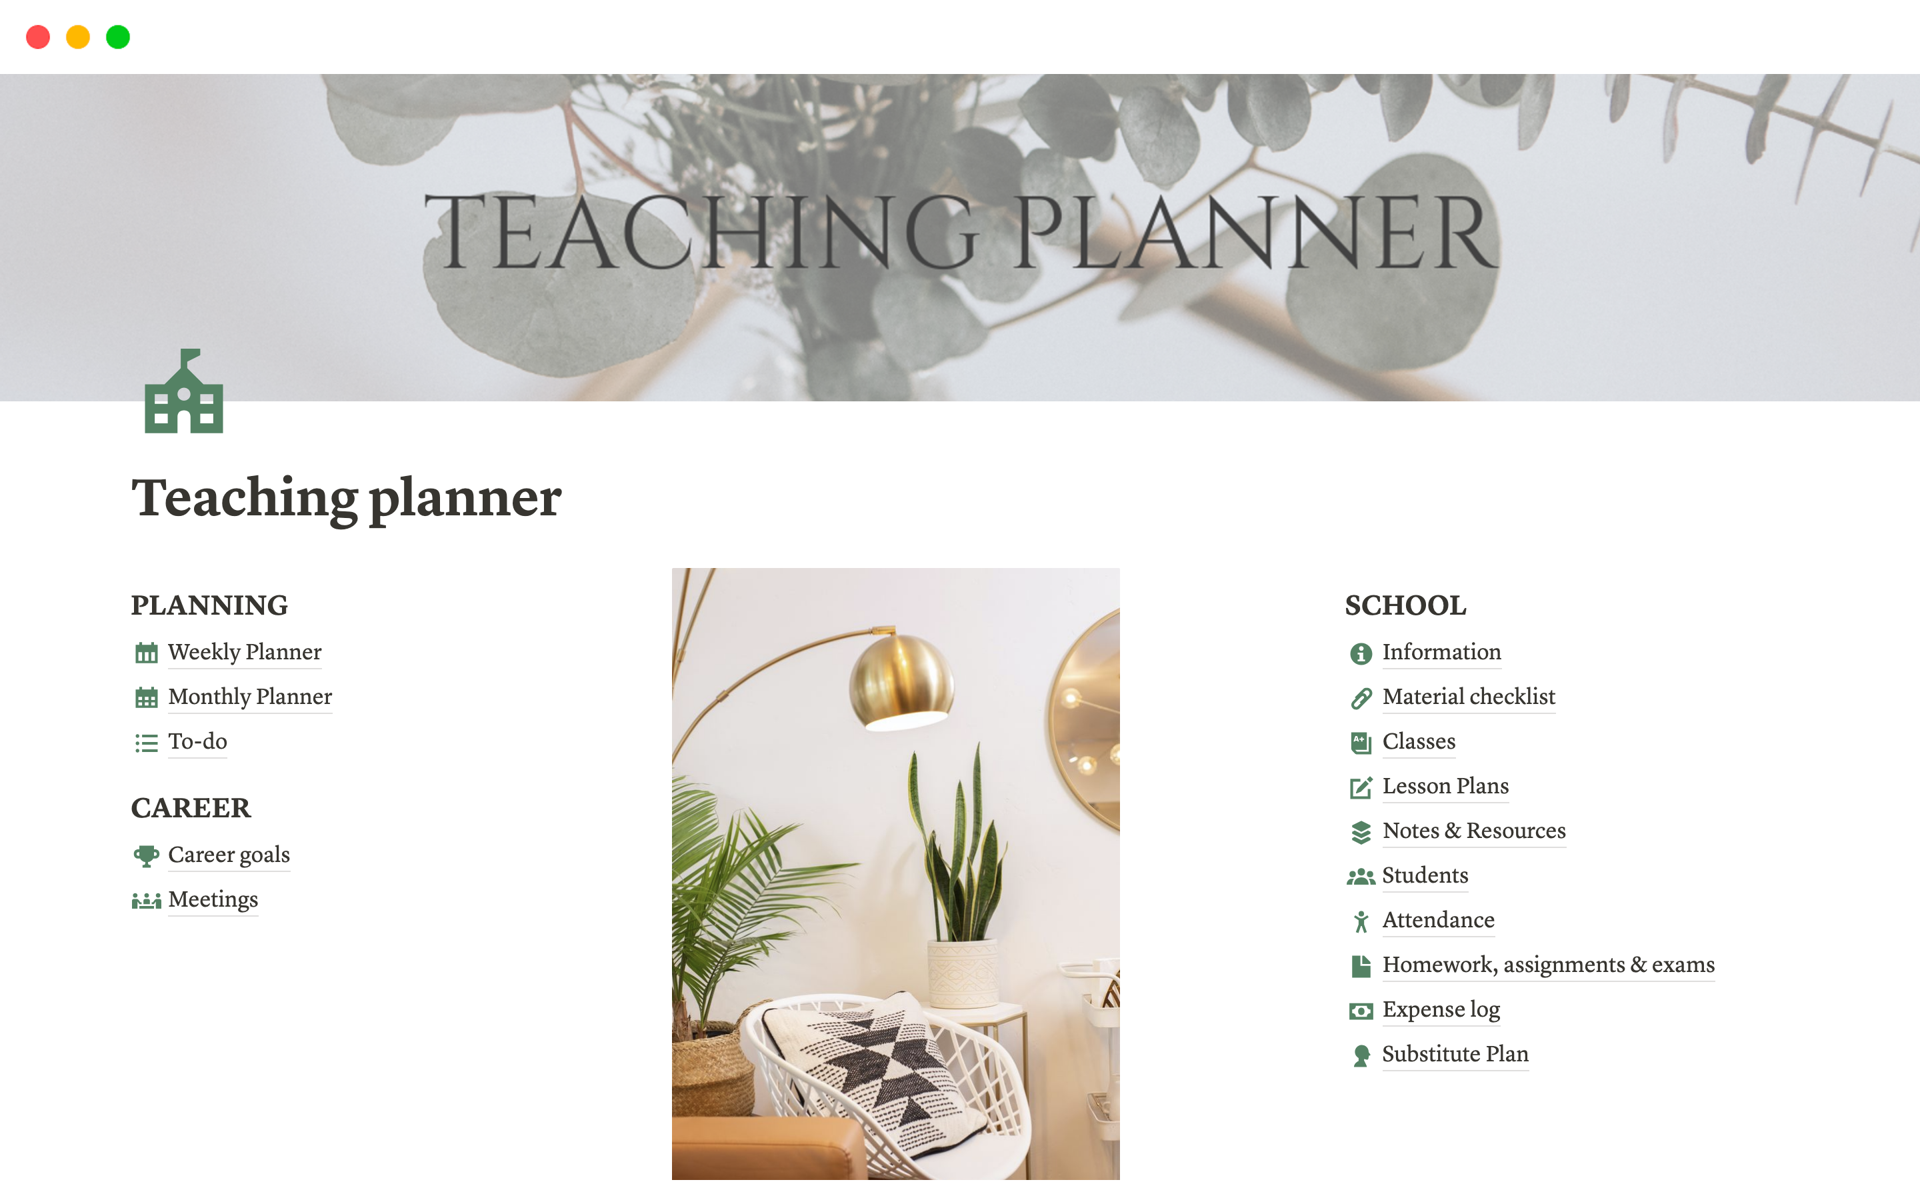 This teacher planner is a lesson planner, class management tool, students log, and much more. It helps teachers get organized and manage their work easily.